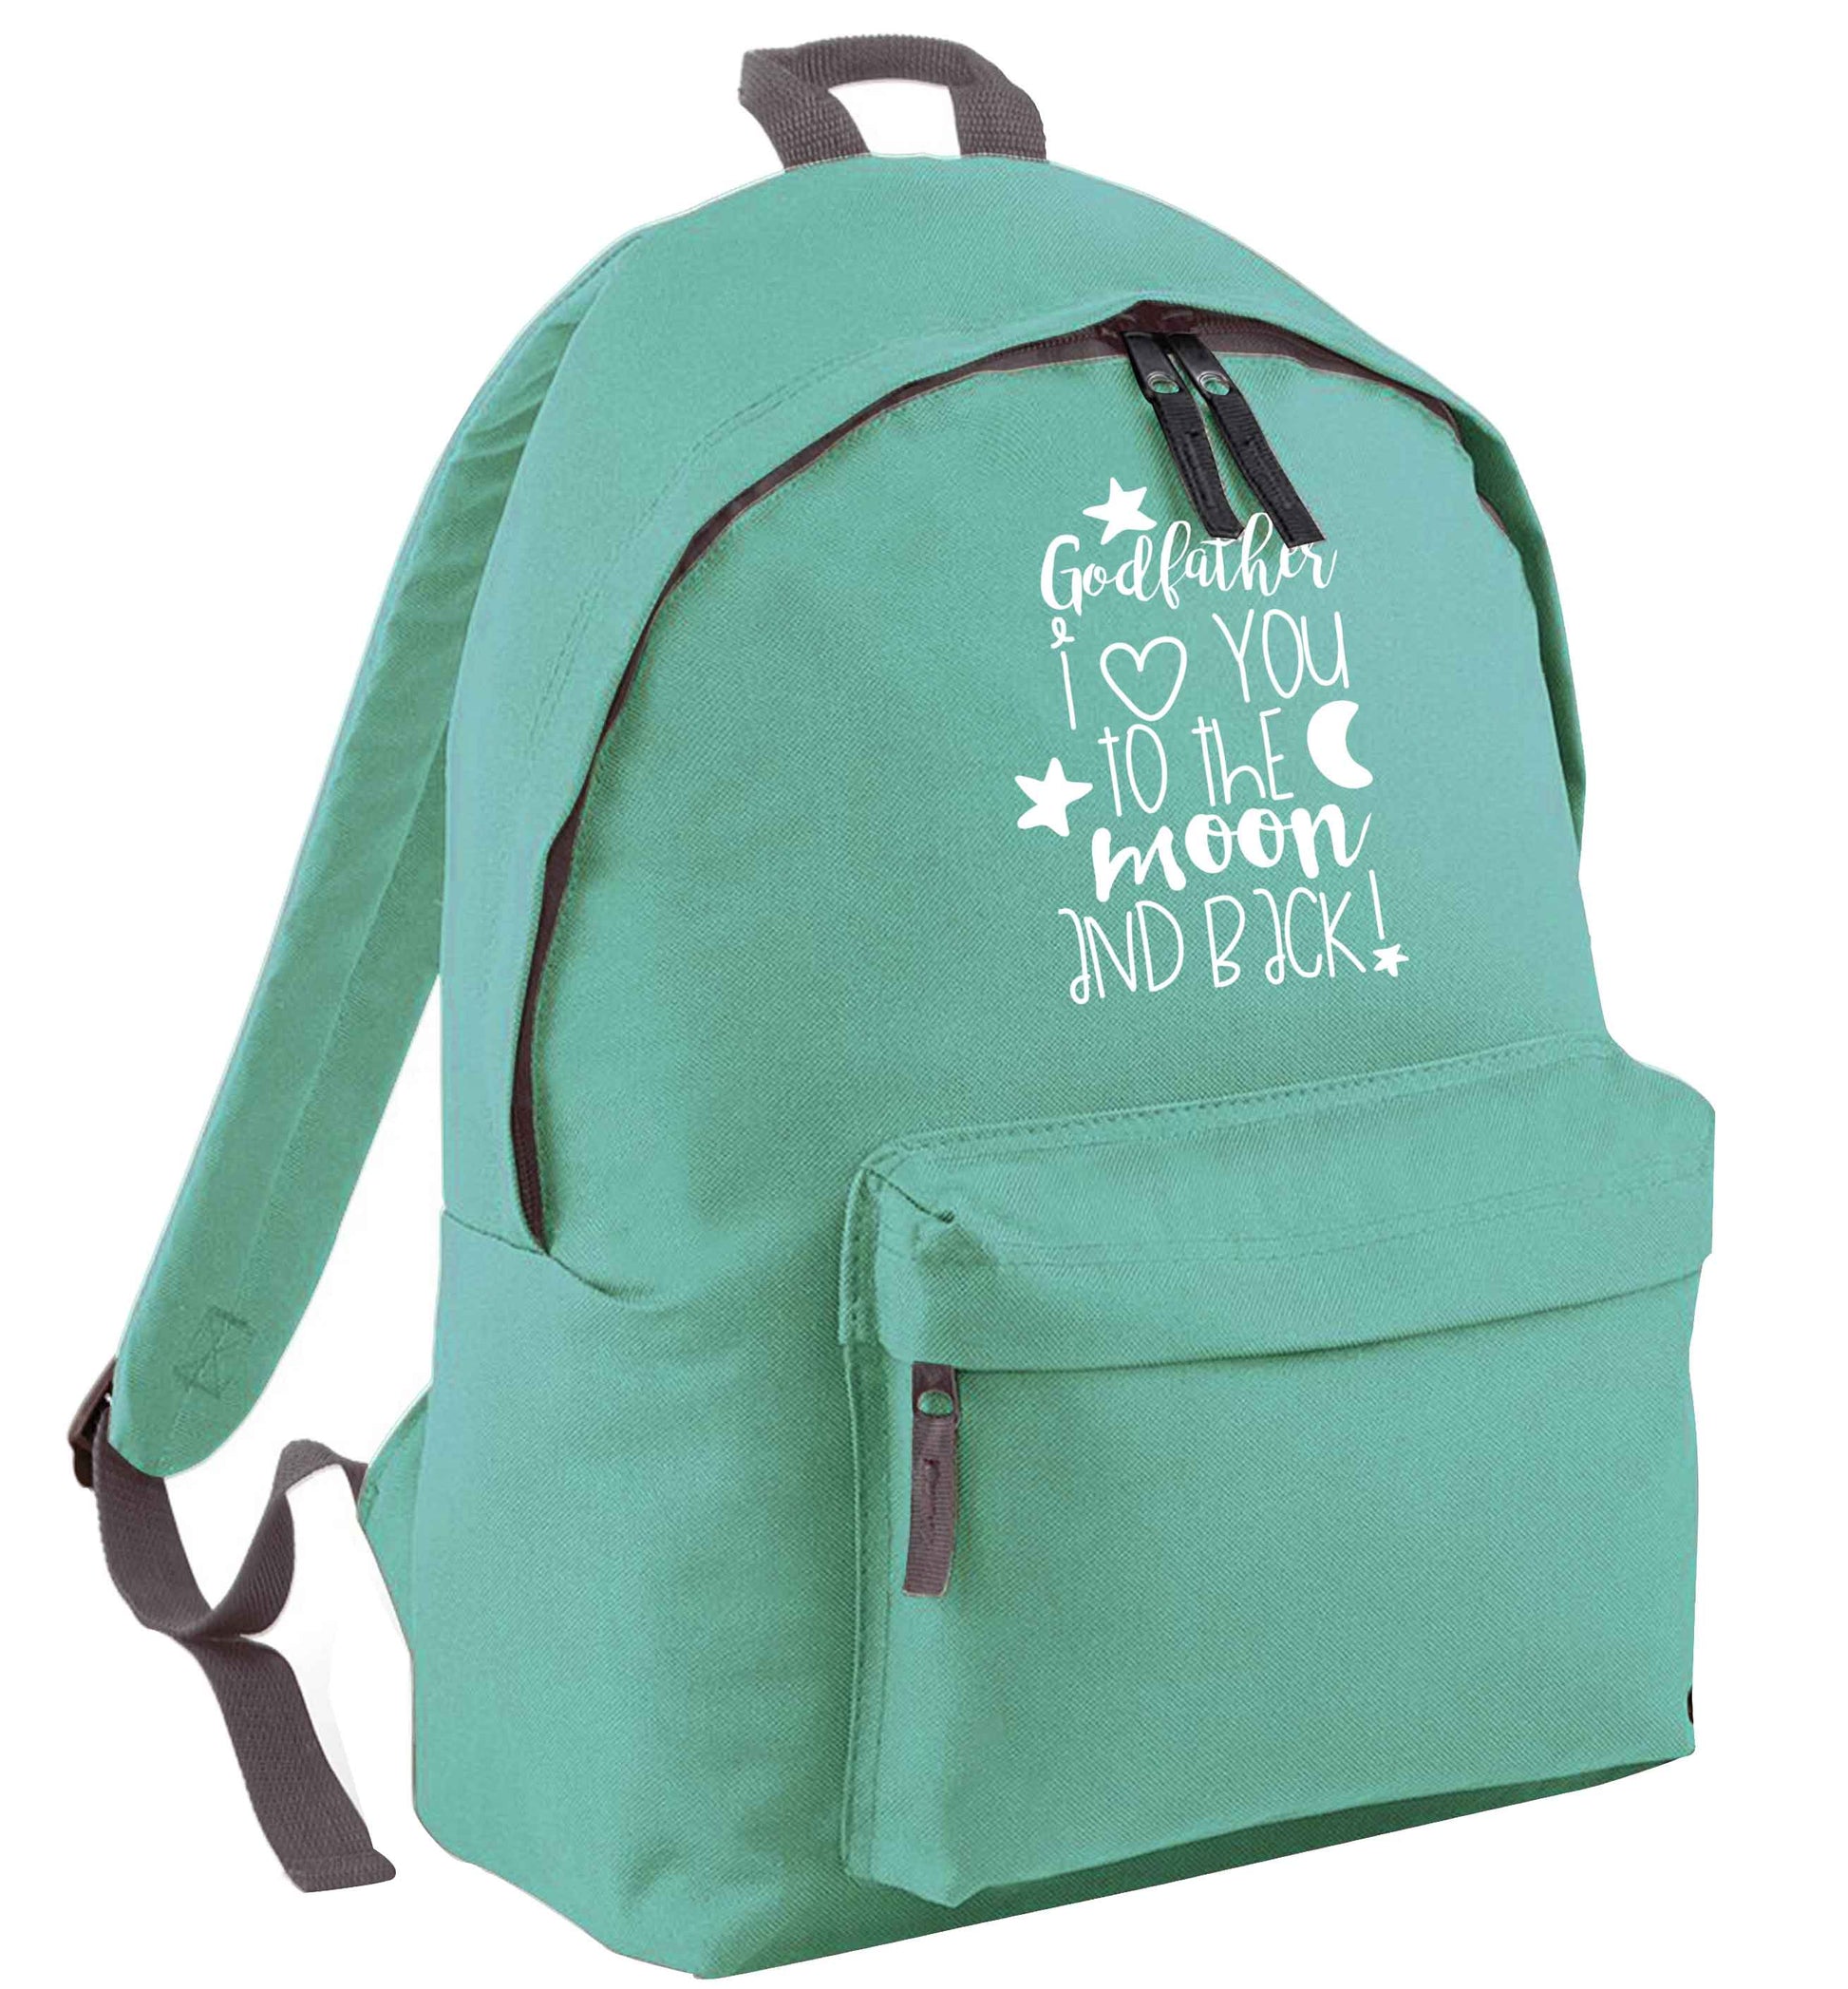 Godfather I love you to the moon and back mint adults backpack